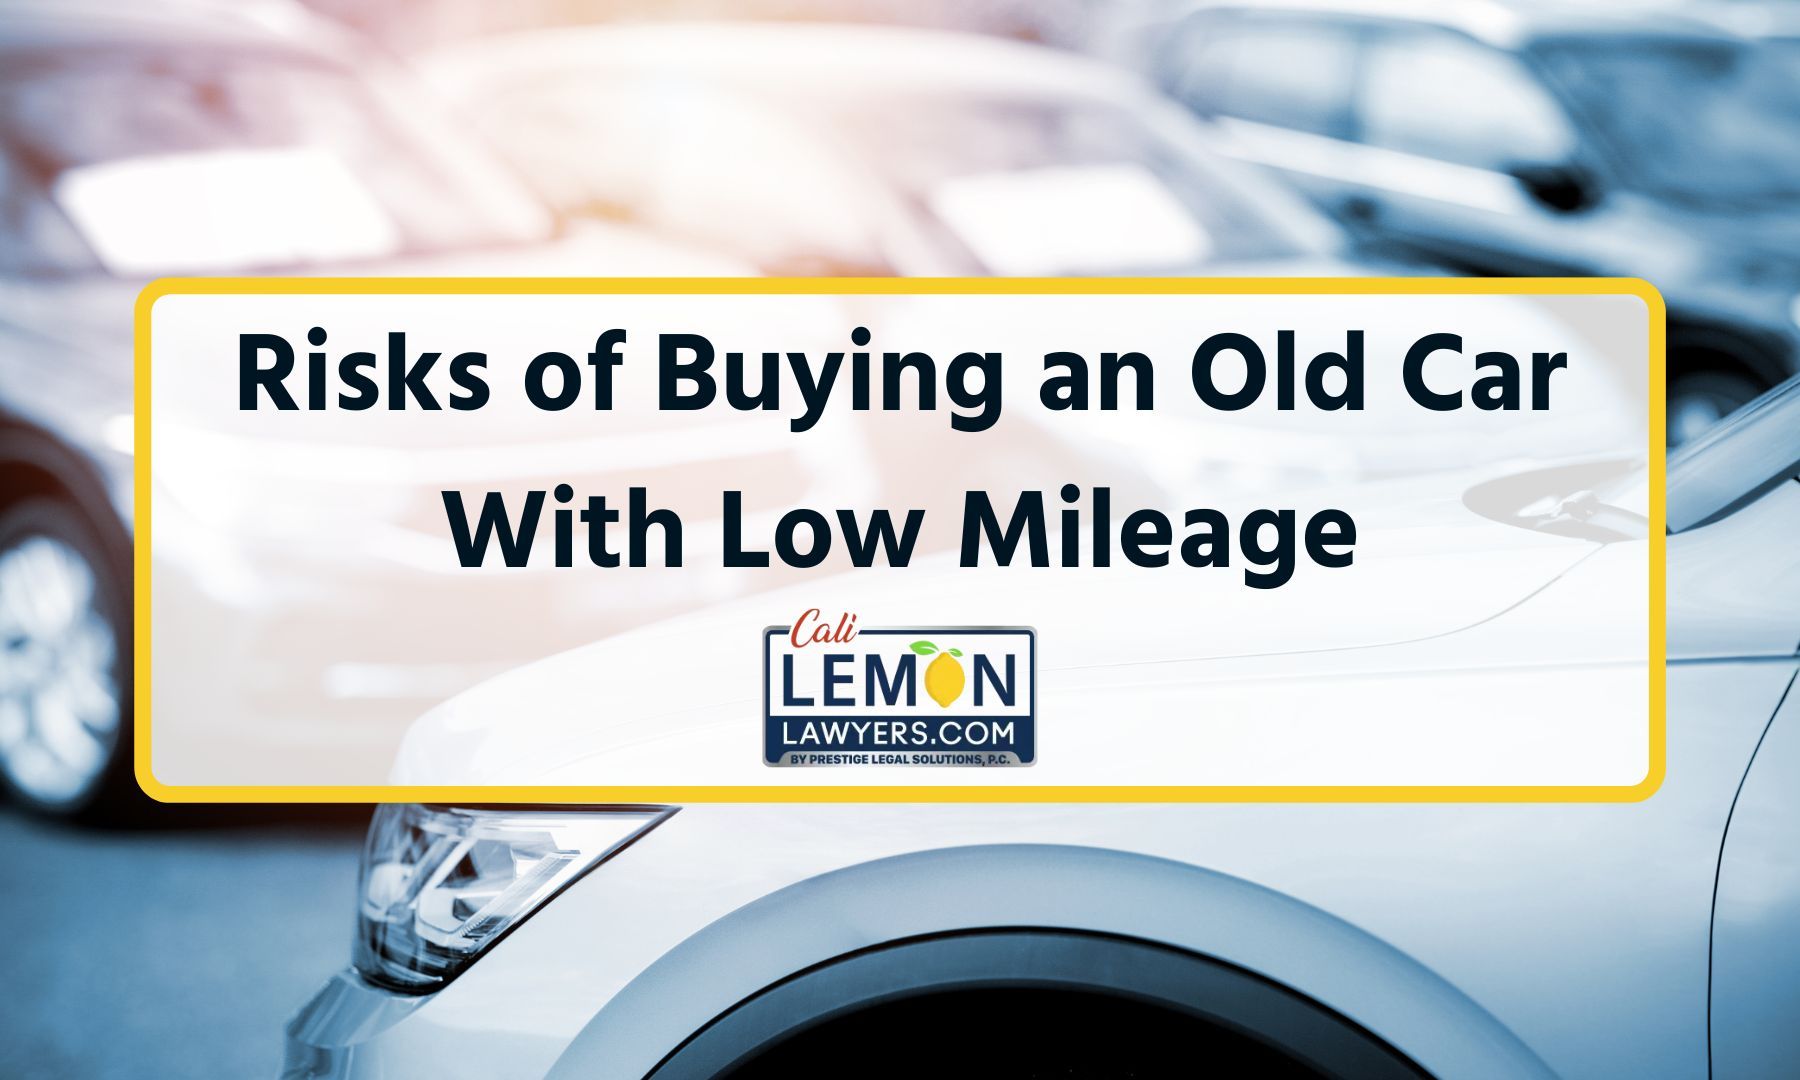 Risks of Buying an Old Car With Low Mileage